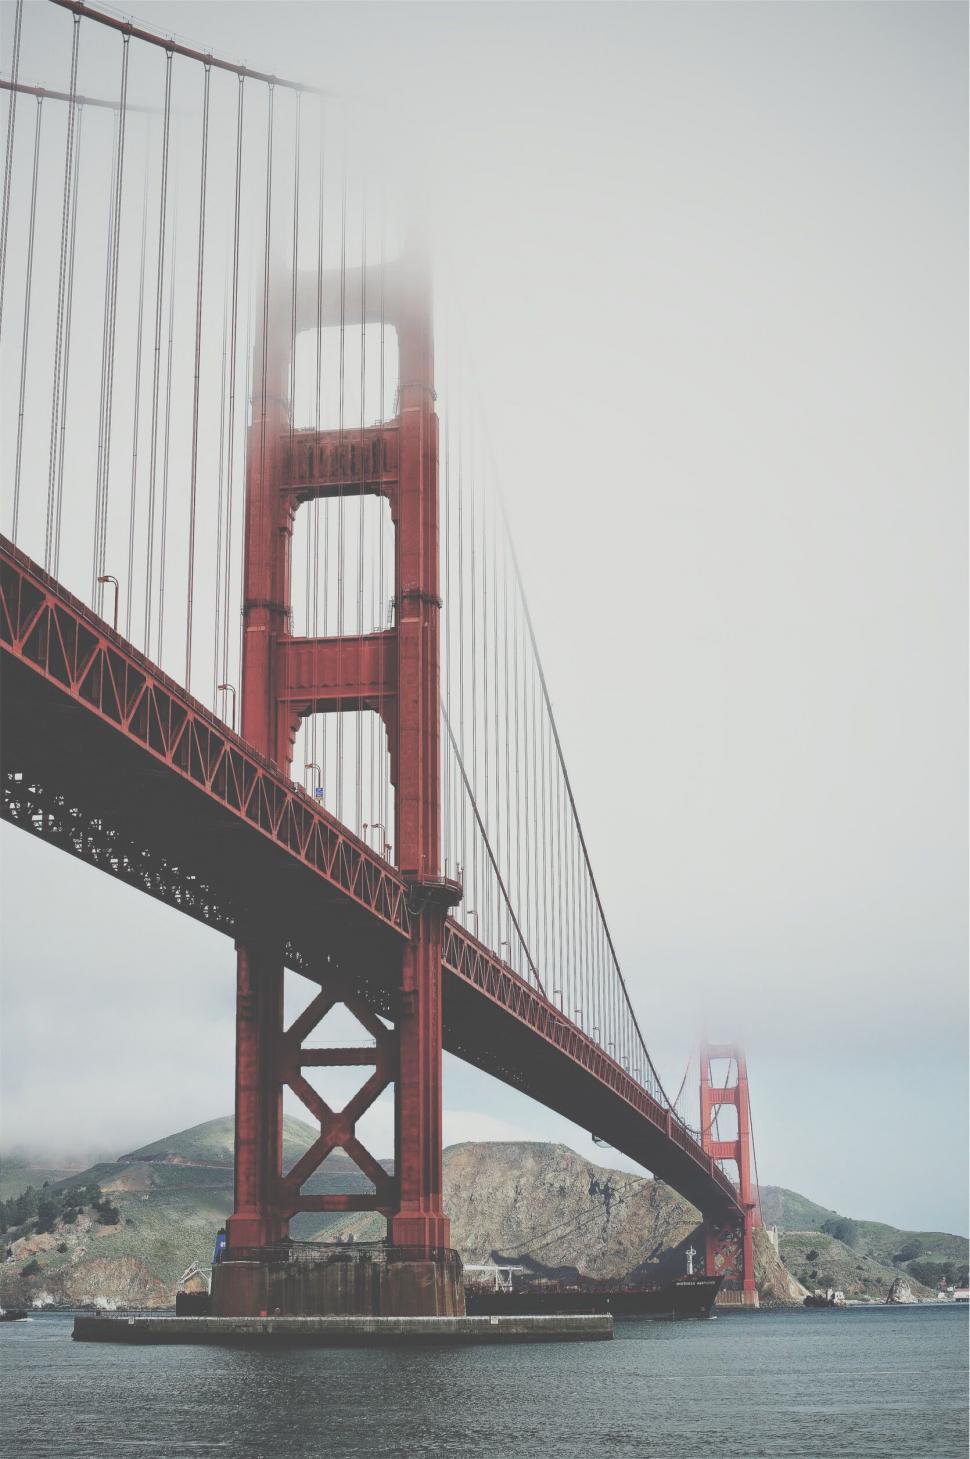 Free Image of Golden gate bridge with a body of water and mountains 